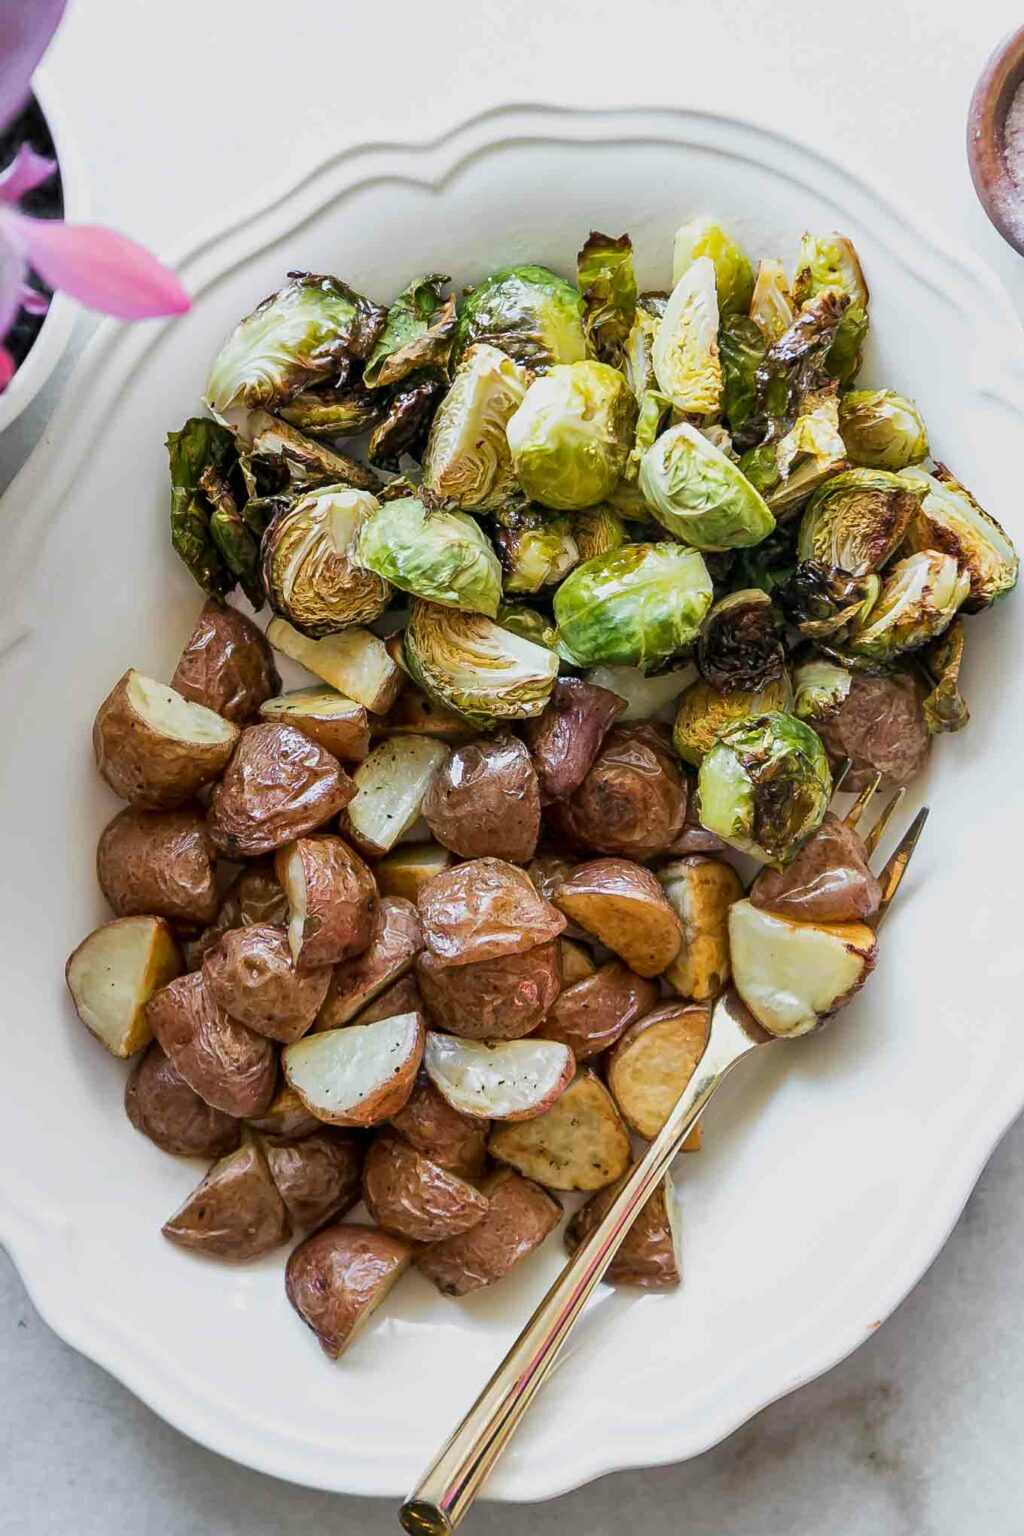 Roasted Brussels Sprouts and Potatoes ⋆ 5 Ingredients, 35 Minutes